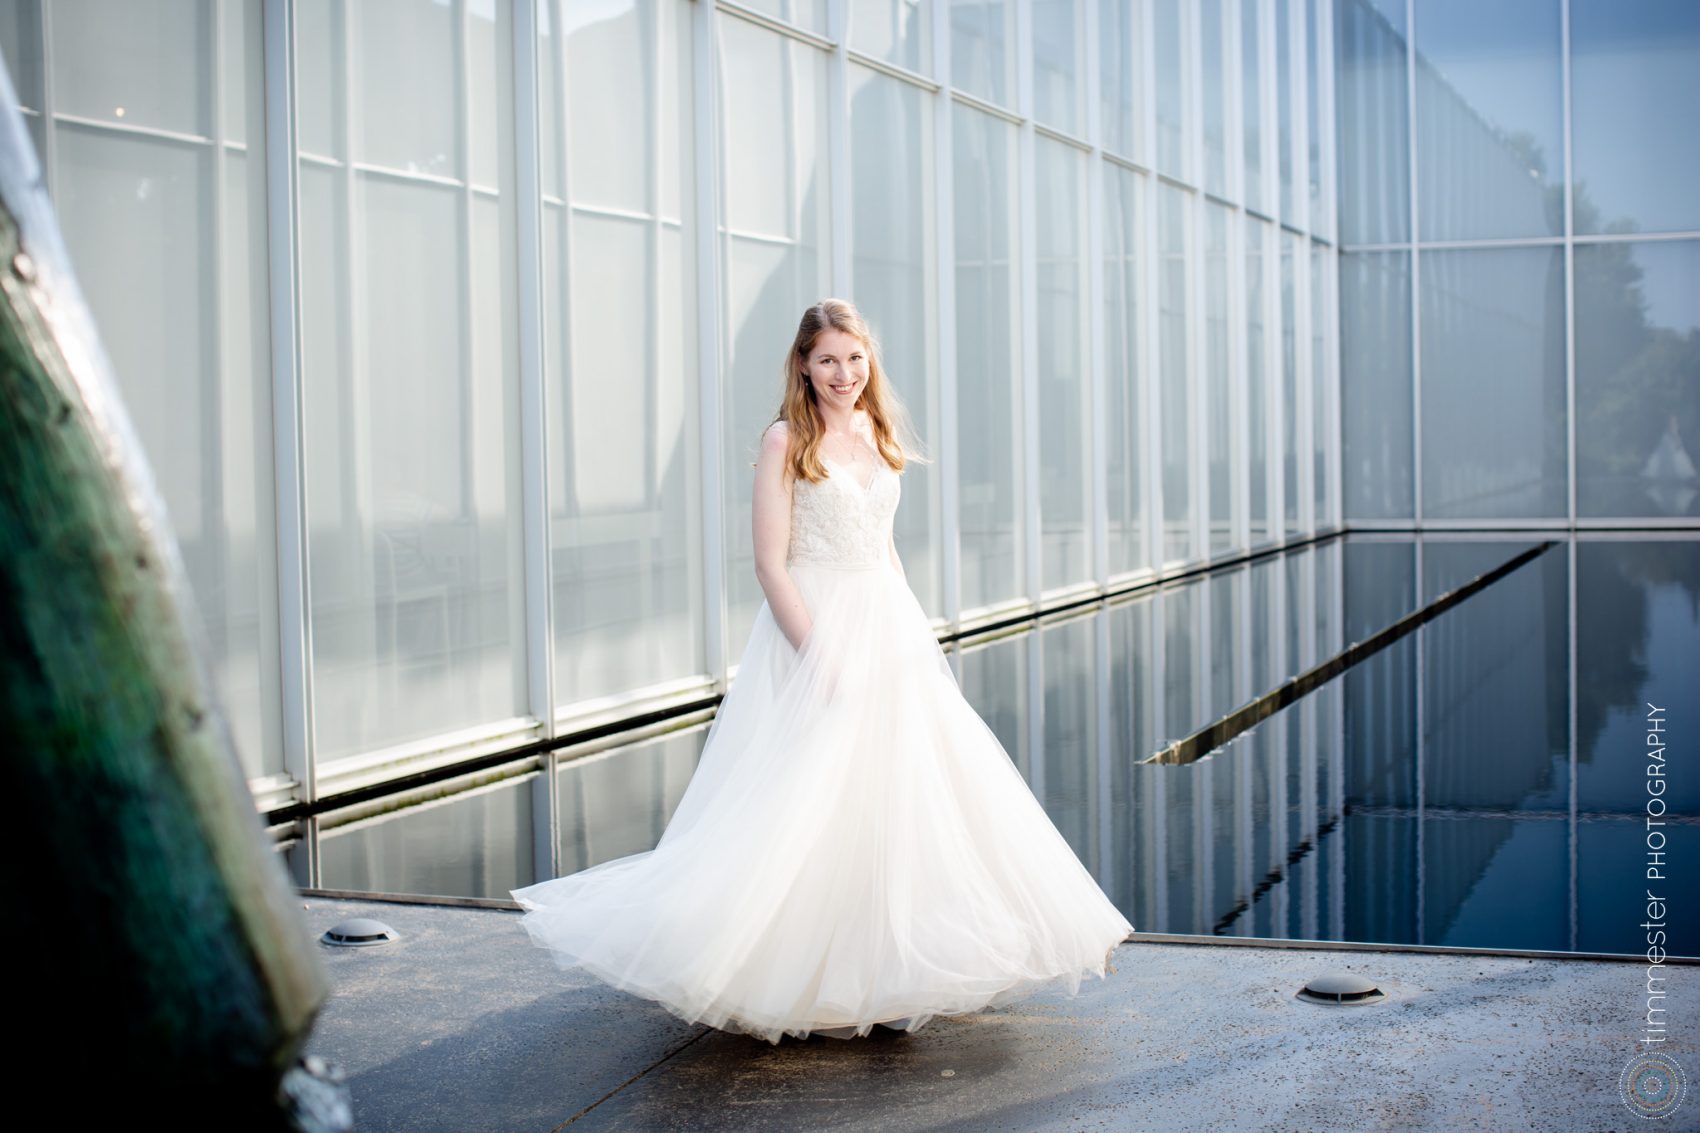 Bridal portraits on her wedding day at NCMA, the North Carolina Museum of Art, in Raleigh.